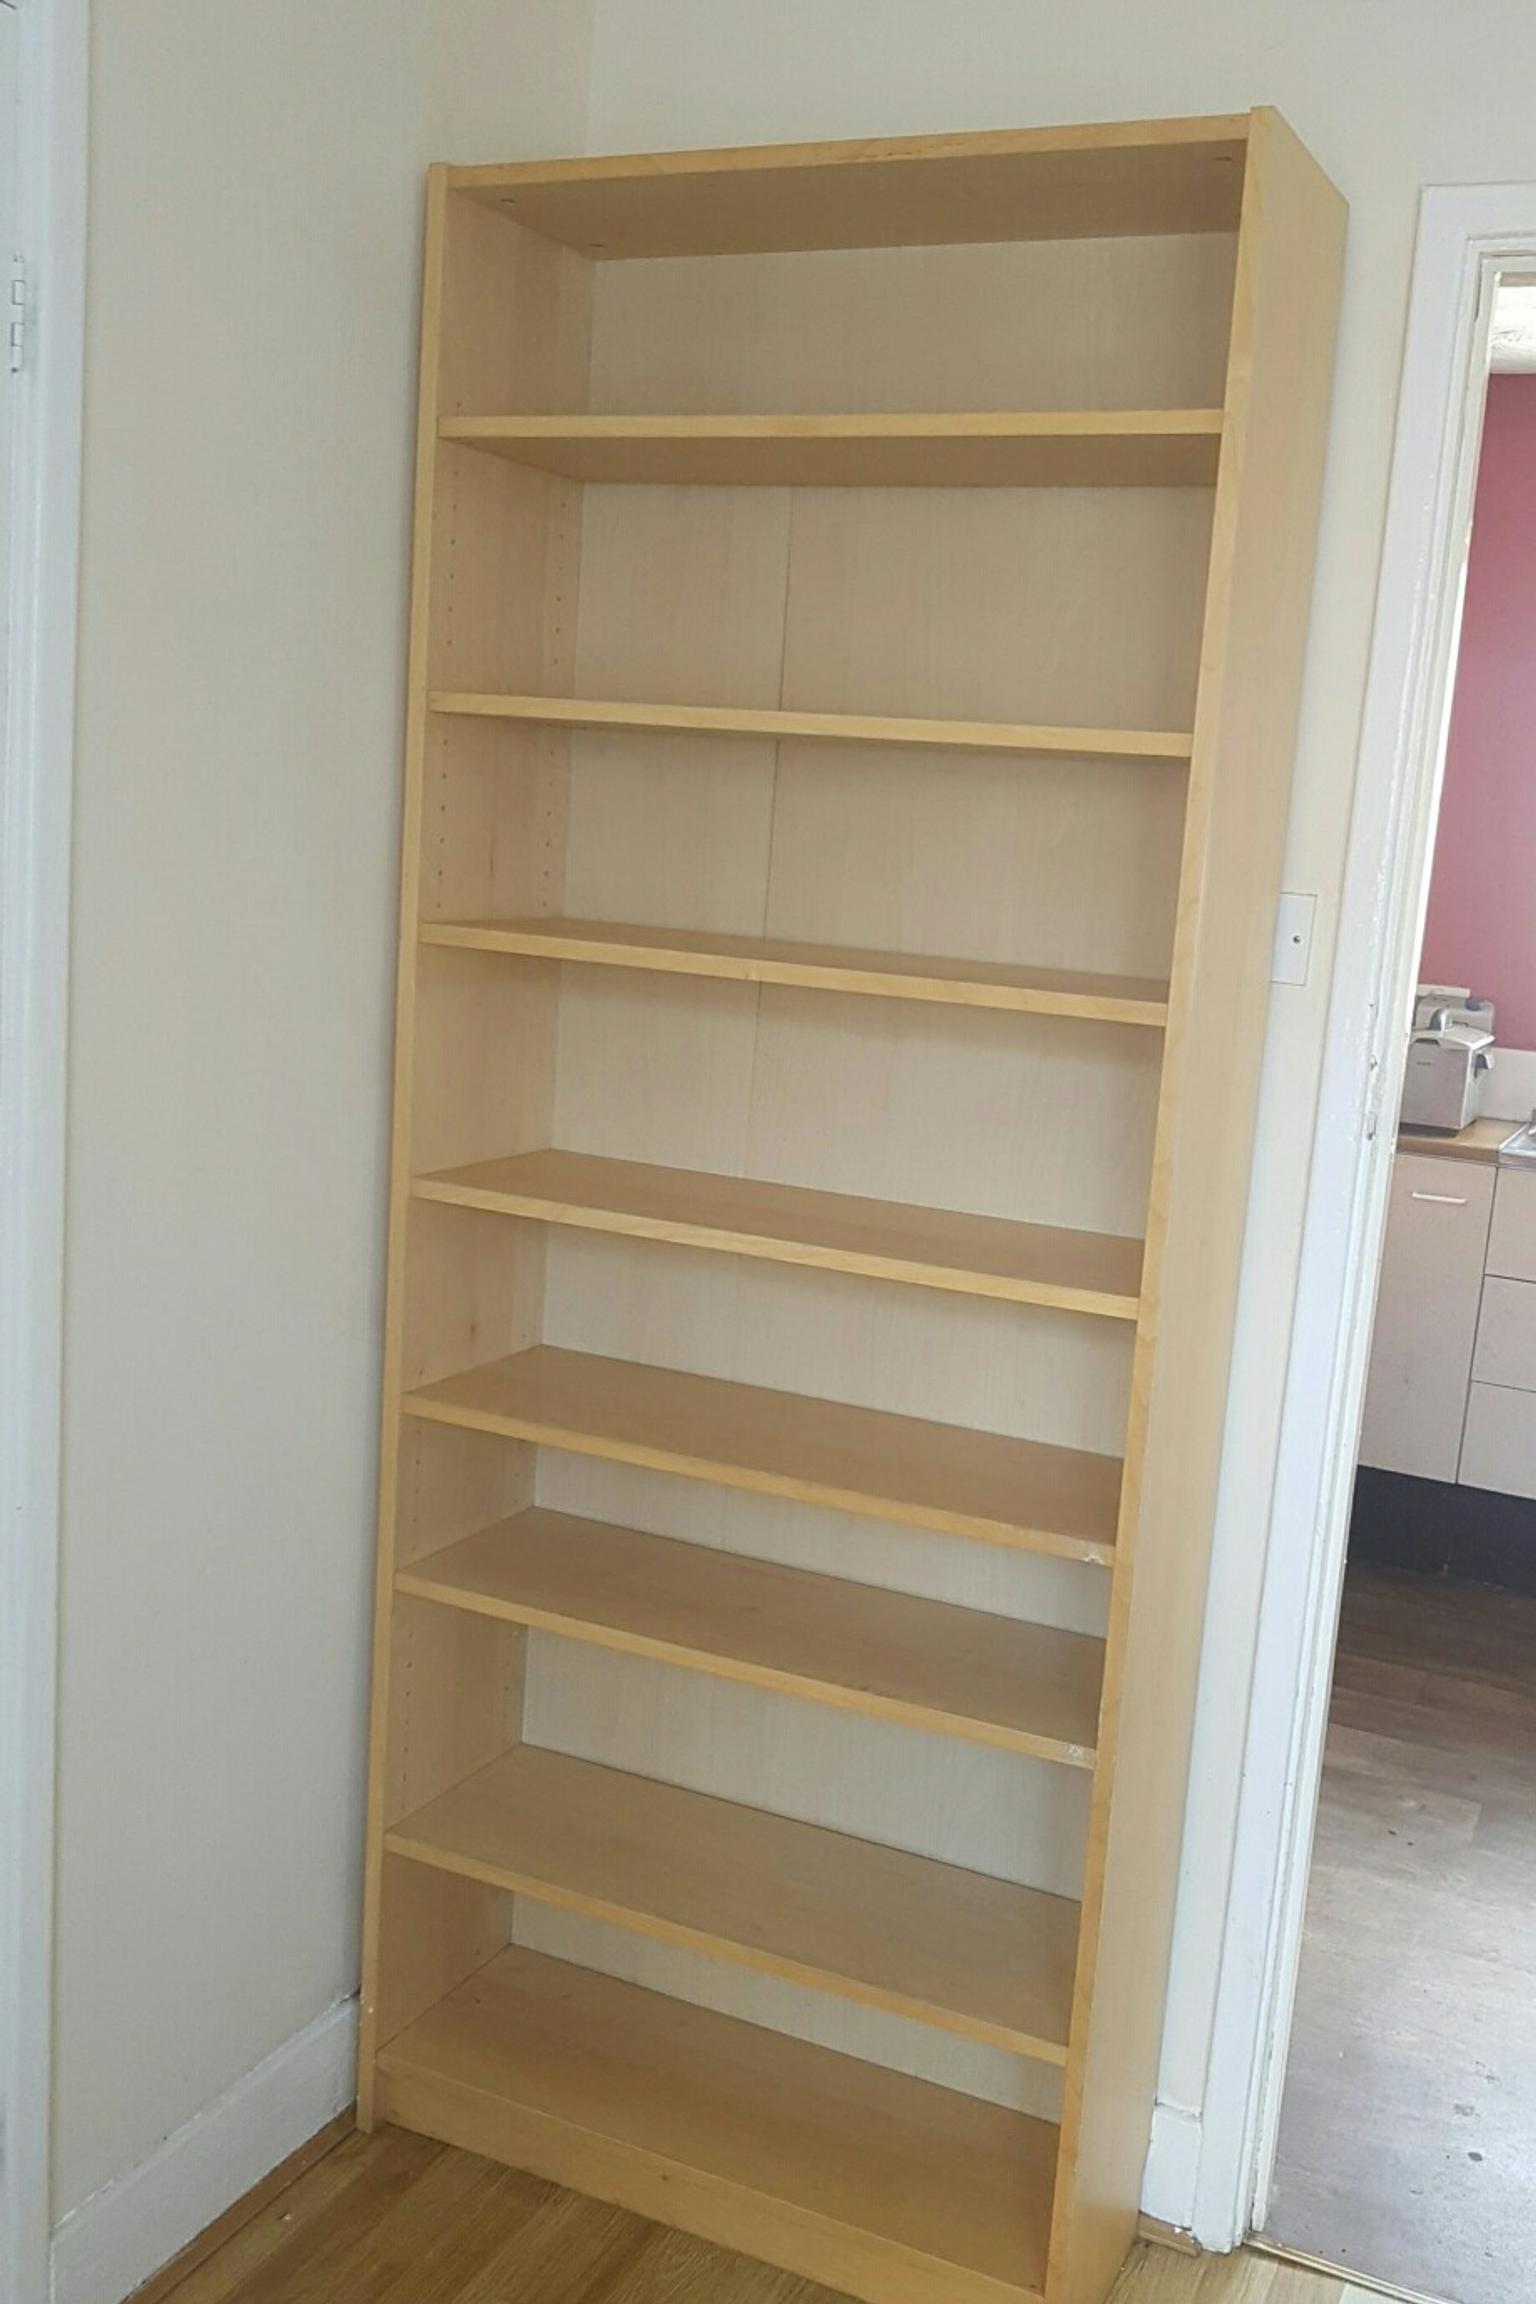 Billy Bookcase From Ikea With Extra Shelves In Ne22 Bedlington For